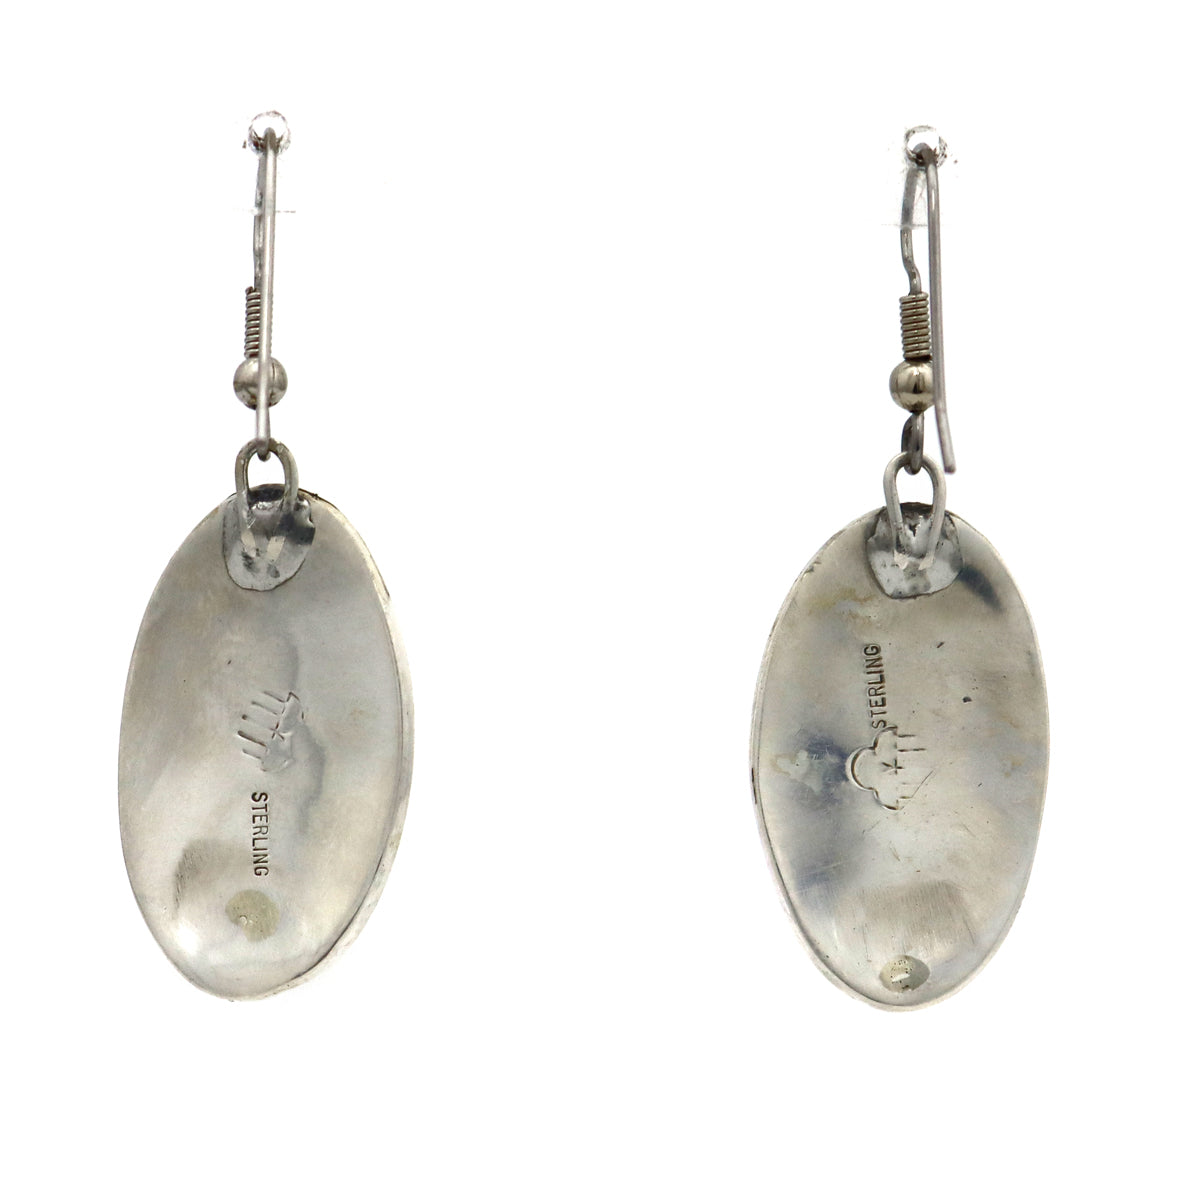 Victor Coochwytewa (1922-2011) - Hopi Sterling Silver Overlay French Hook Earrings with Kokopelli Design c. 1960s, 2" x 0.75"